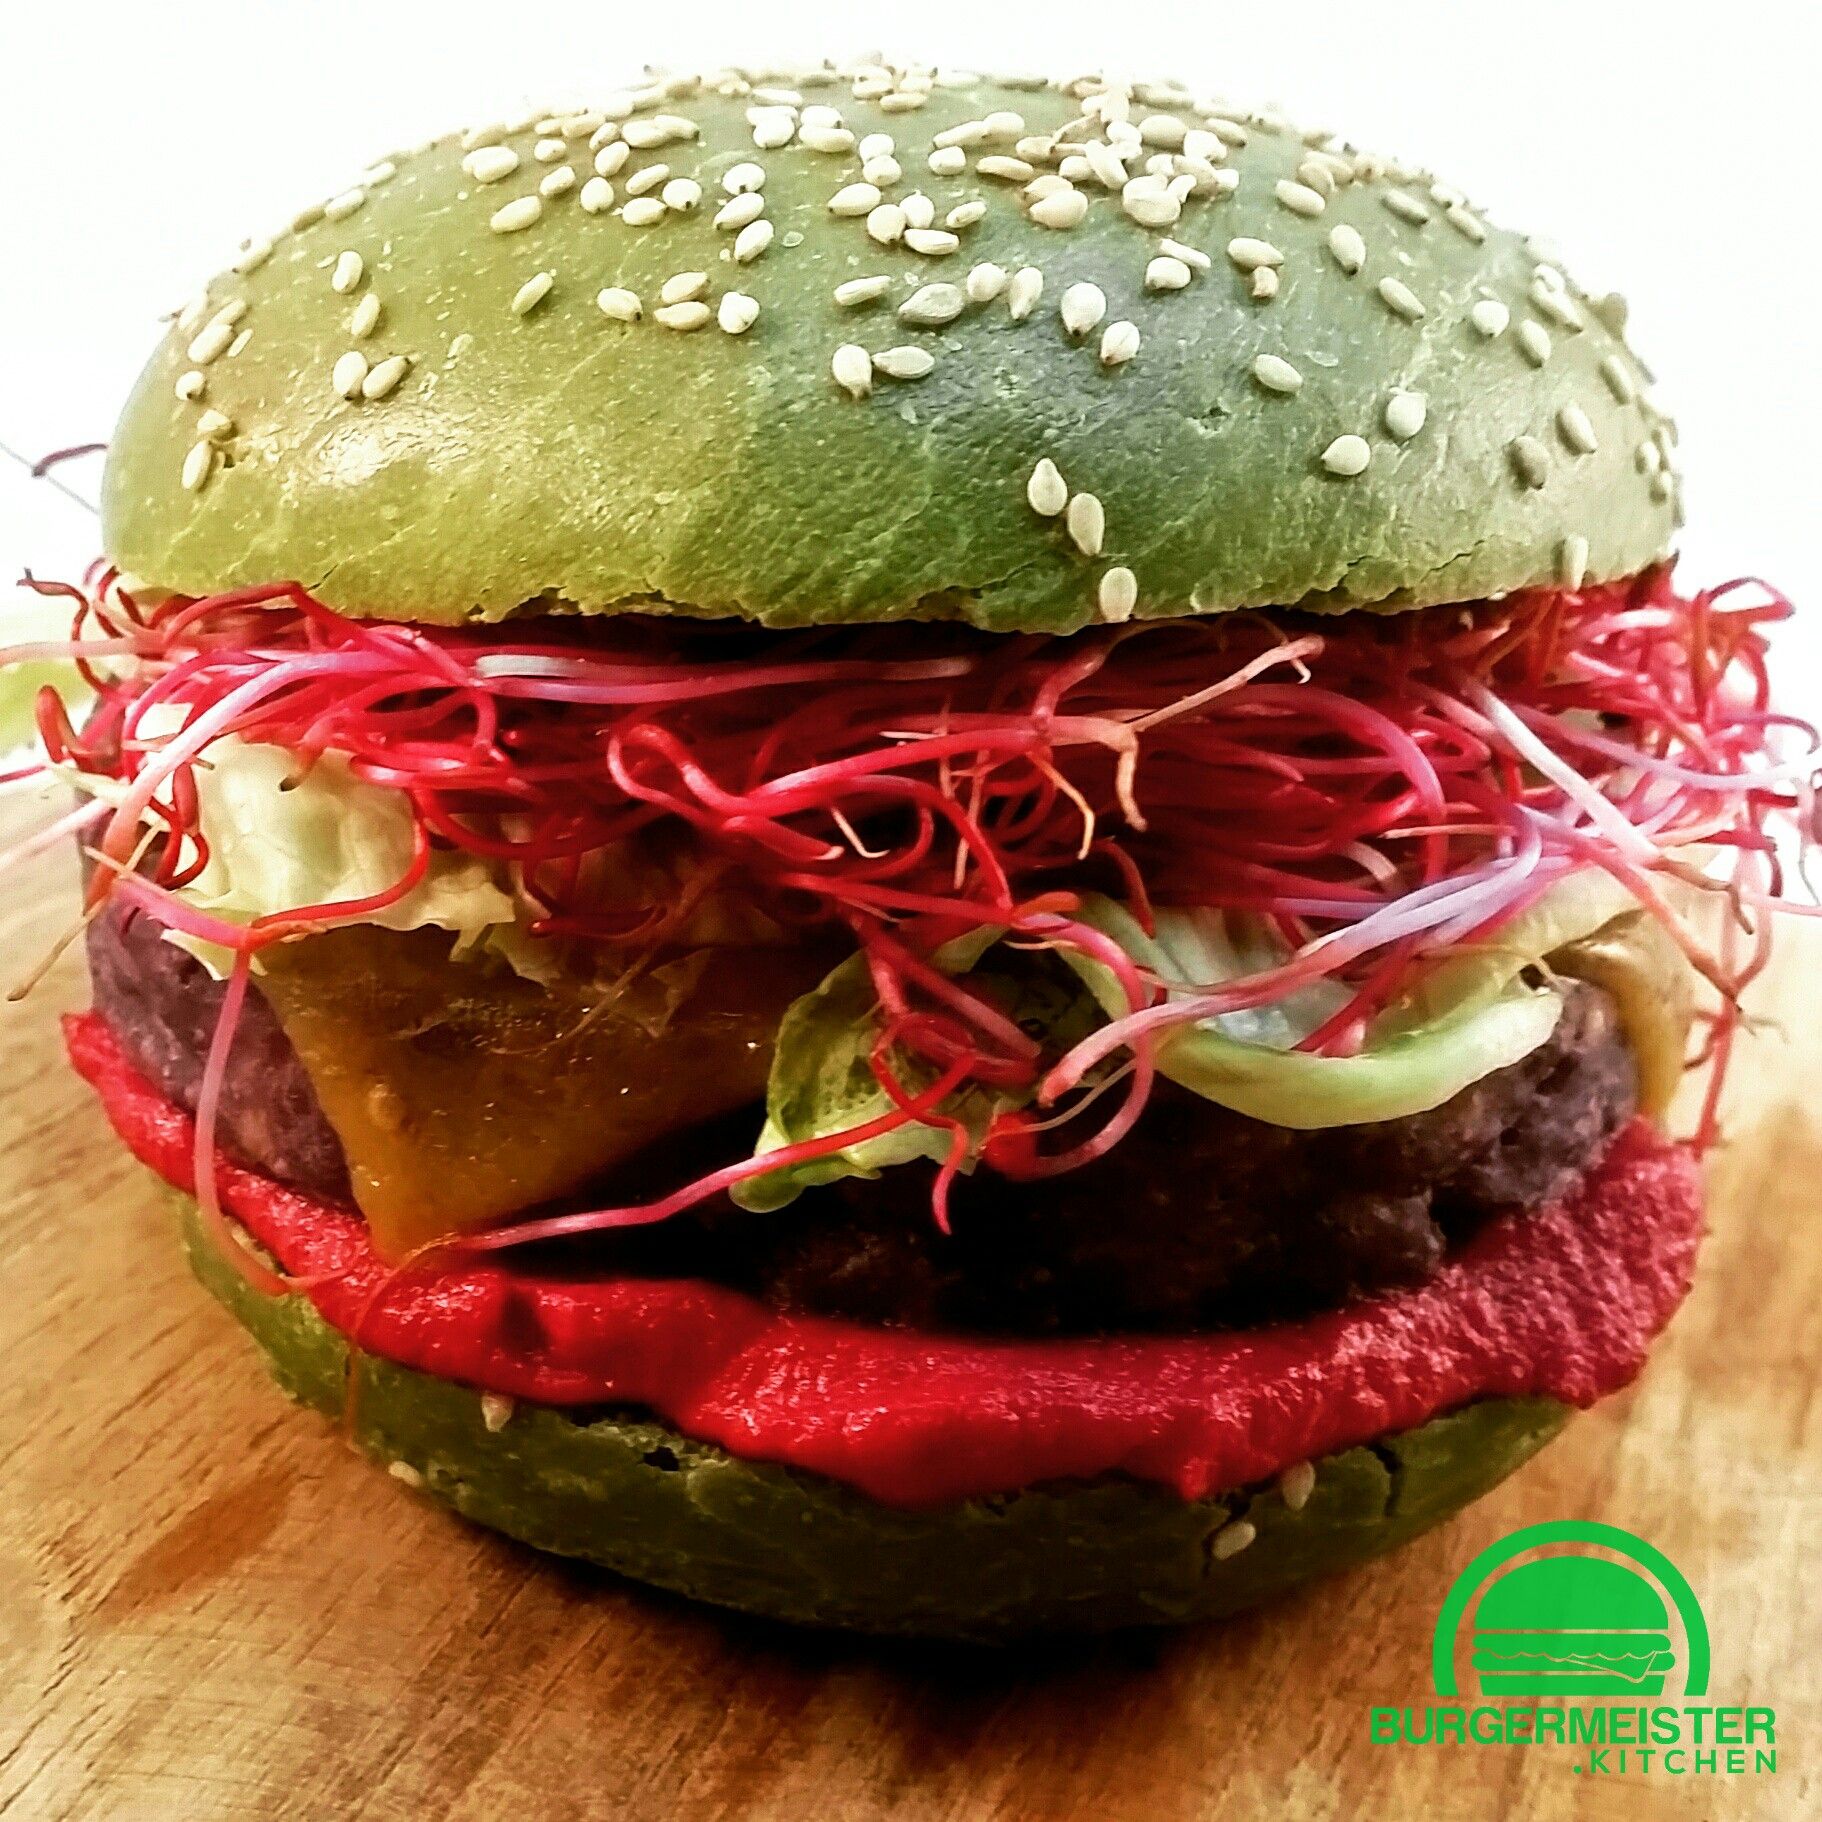 The monster Green burger bun (colored with spinach), veggie blue ...